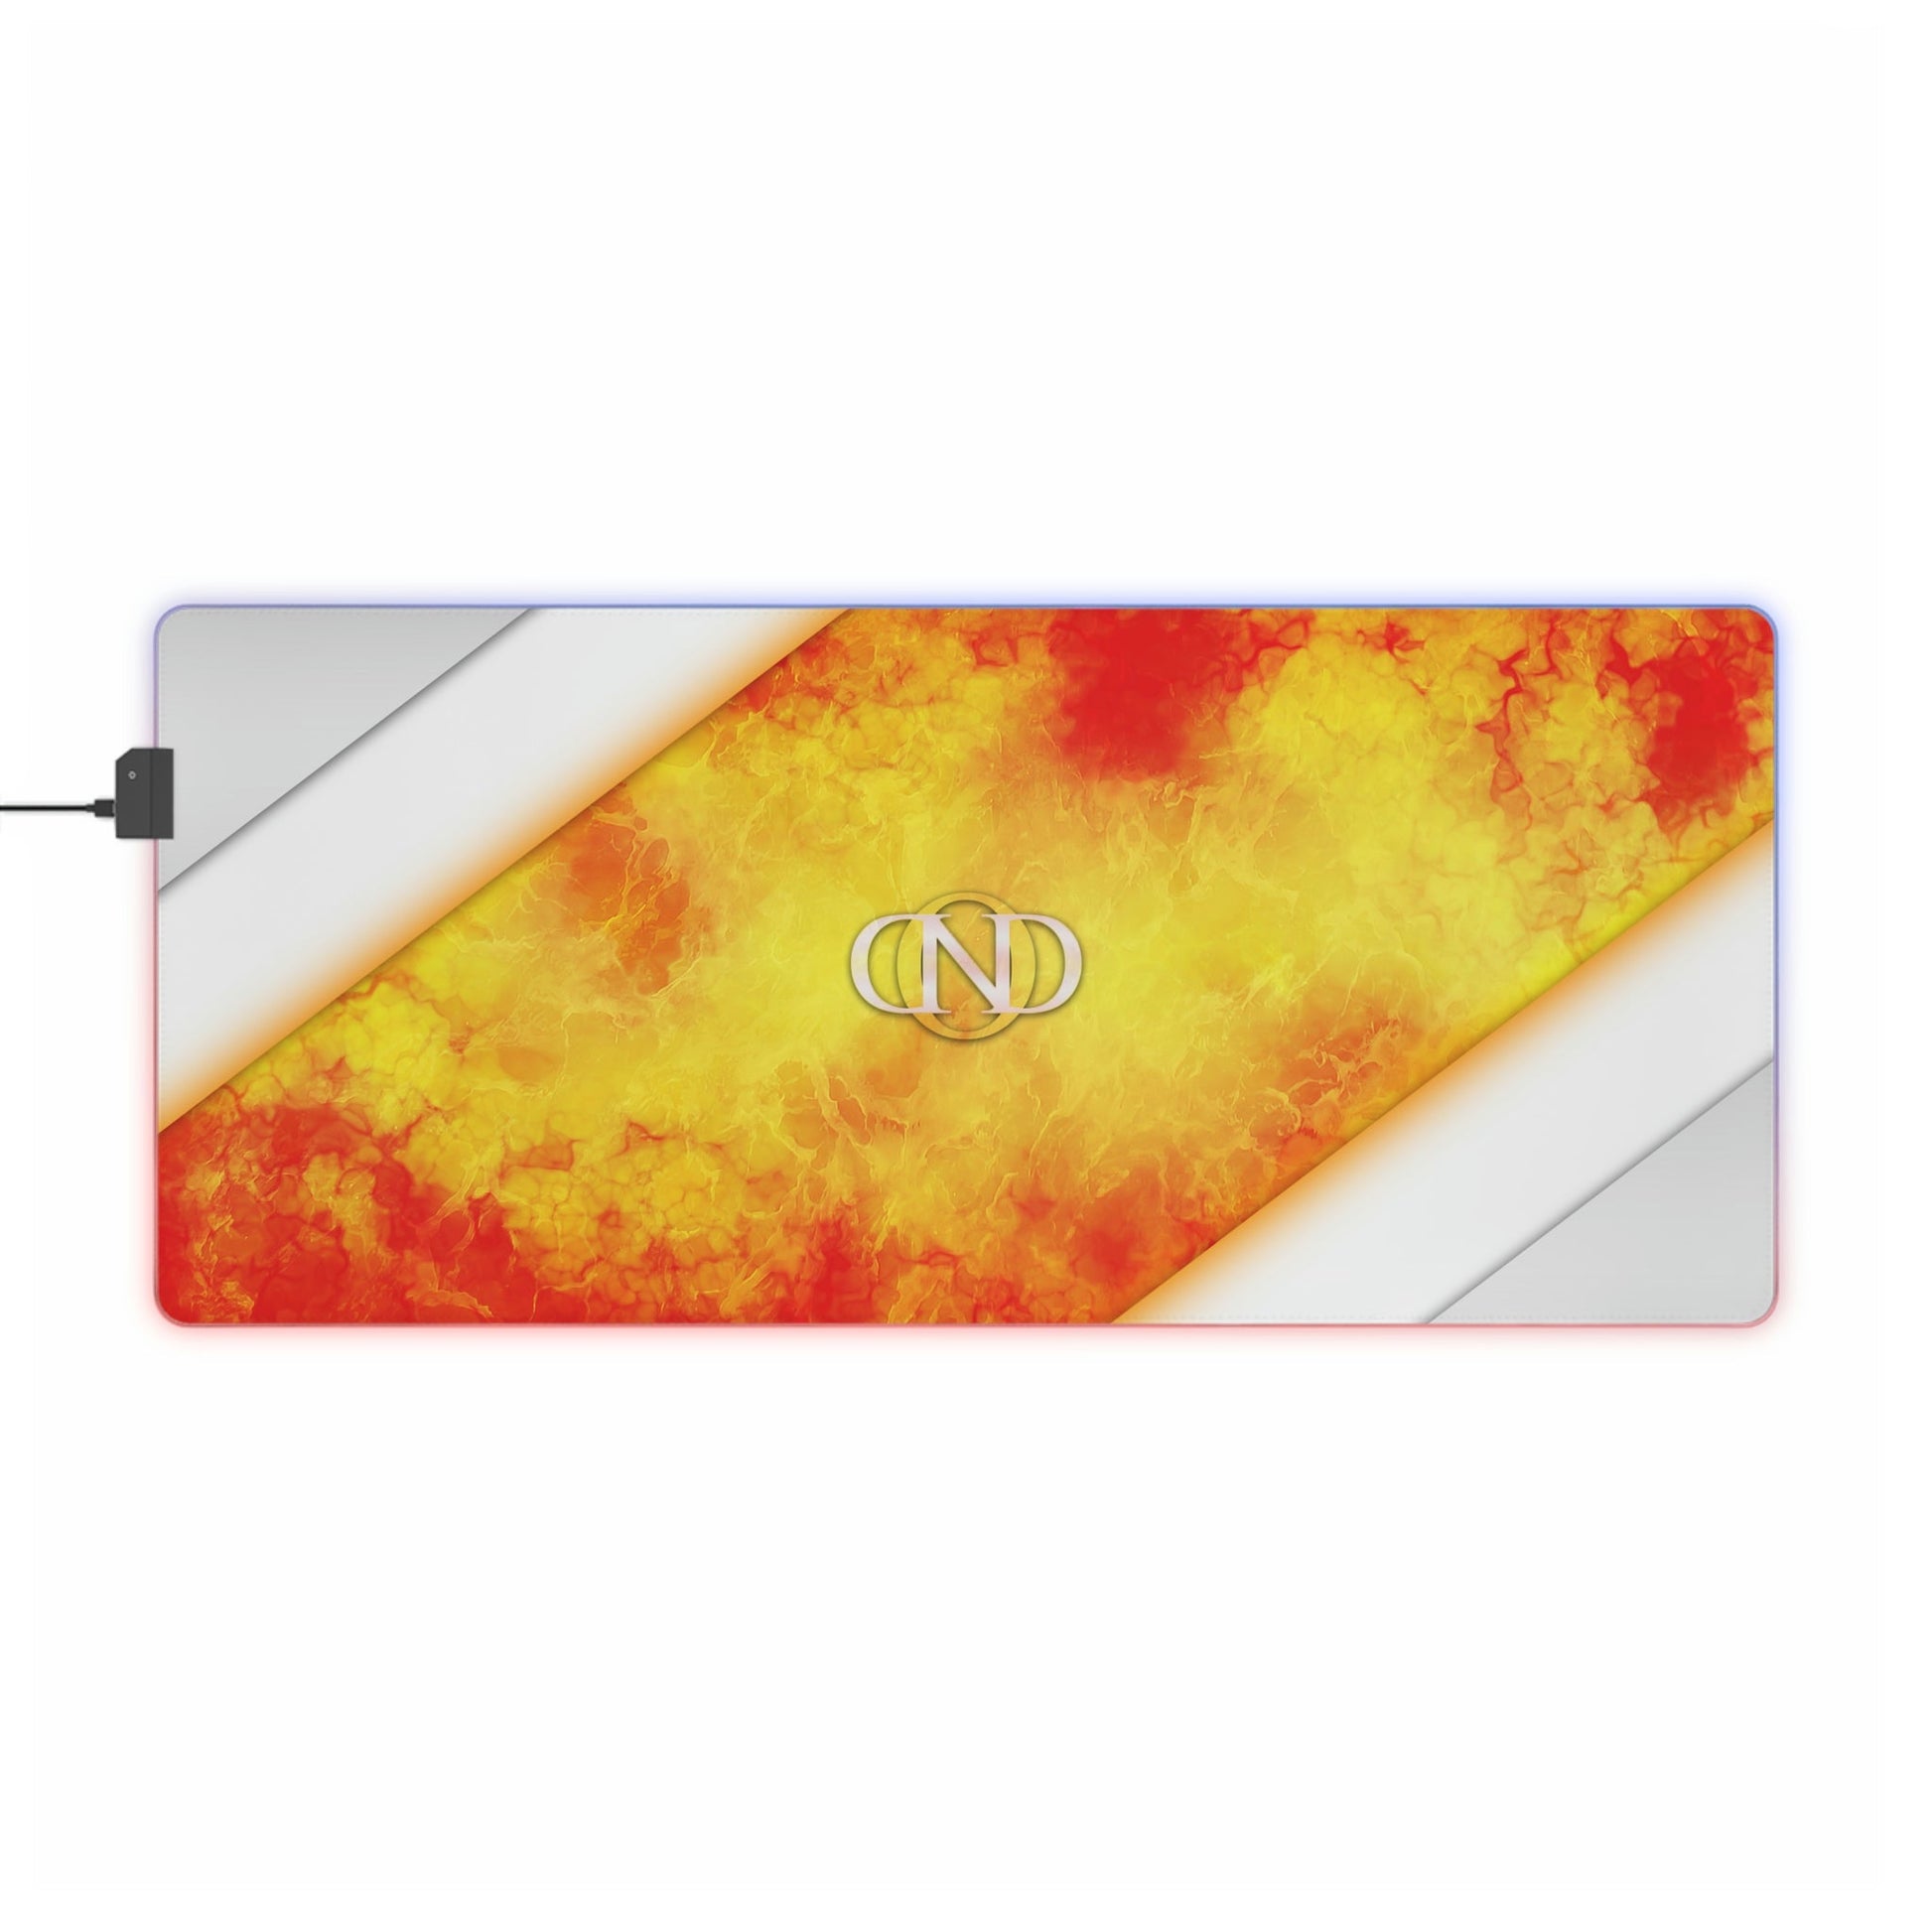 2 Neduz LED Gaming Mouse Pad with Clean Steel Flames Design